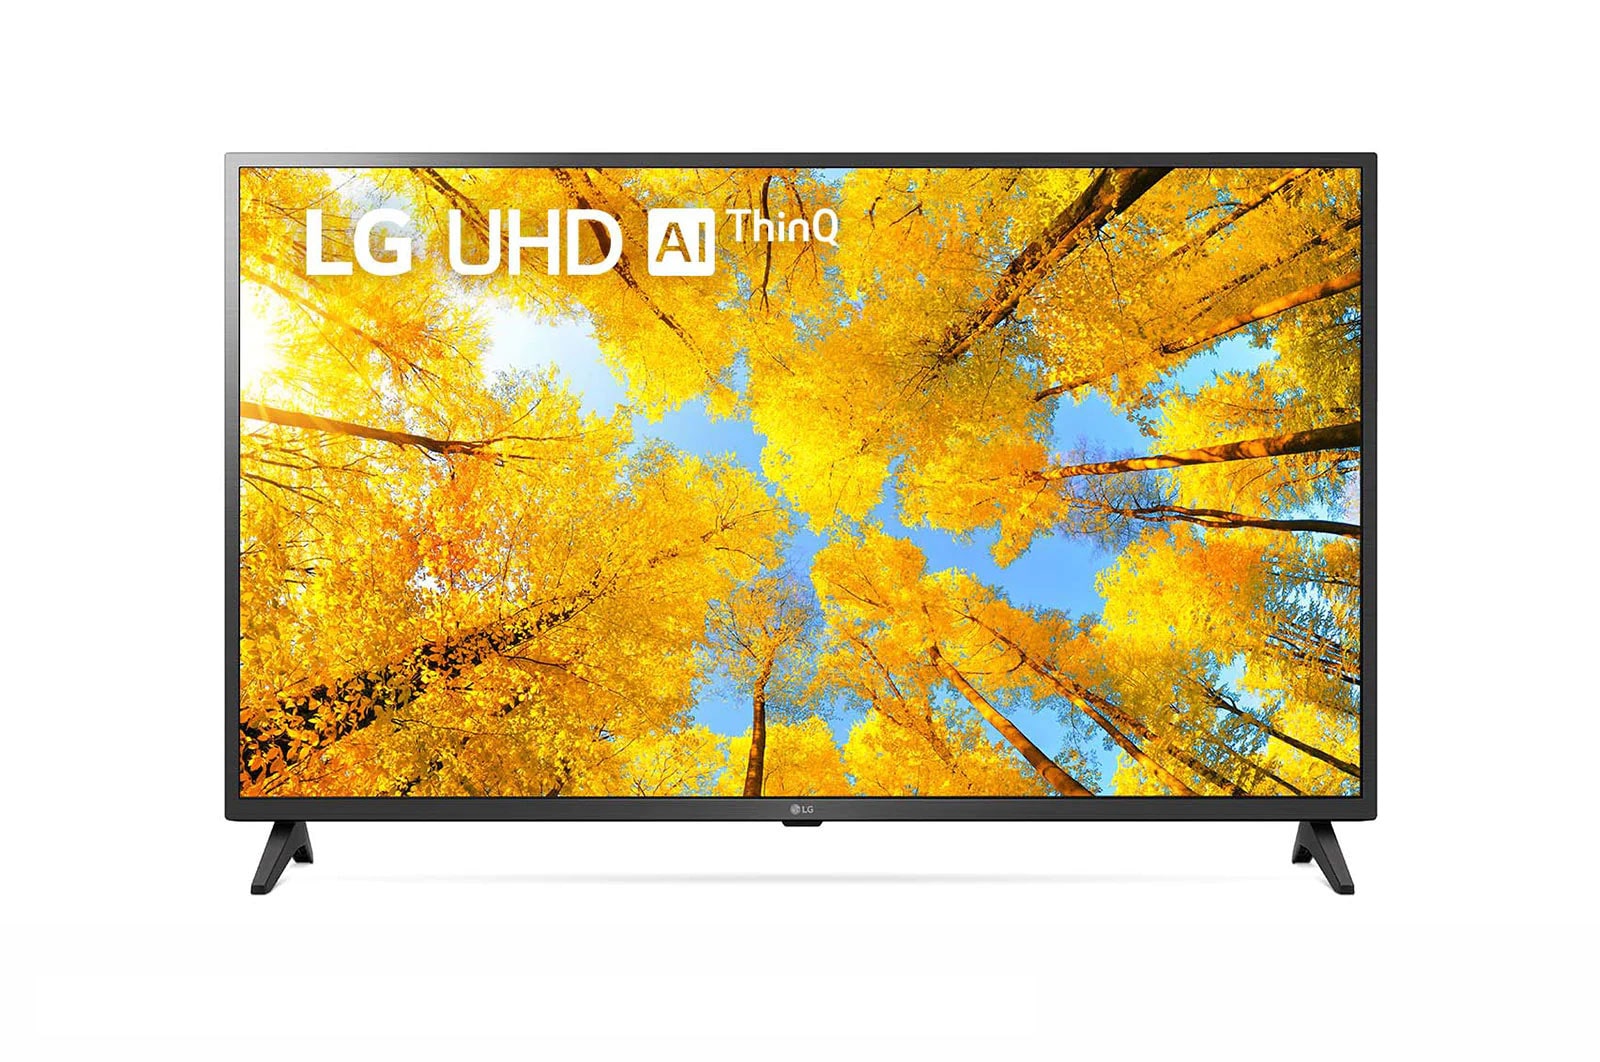 LG UR7500 4K smart TVs with webOS and LG ThinQ AI launched in India: All  the details - Times of India